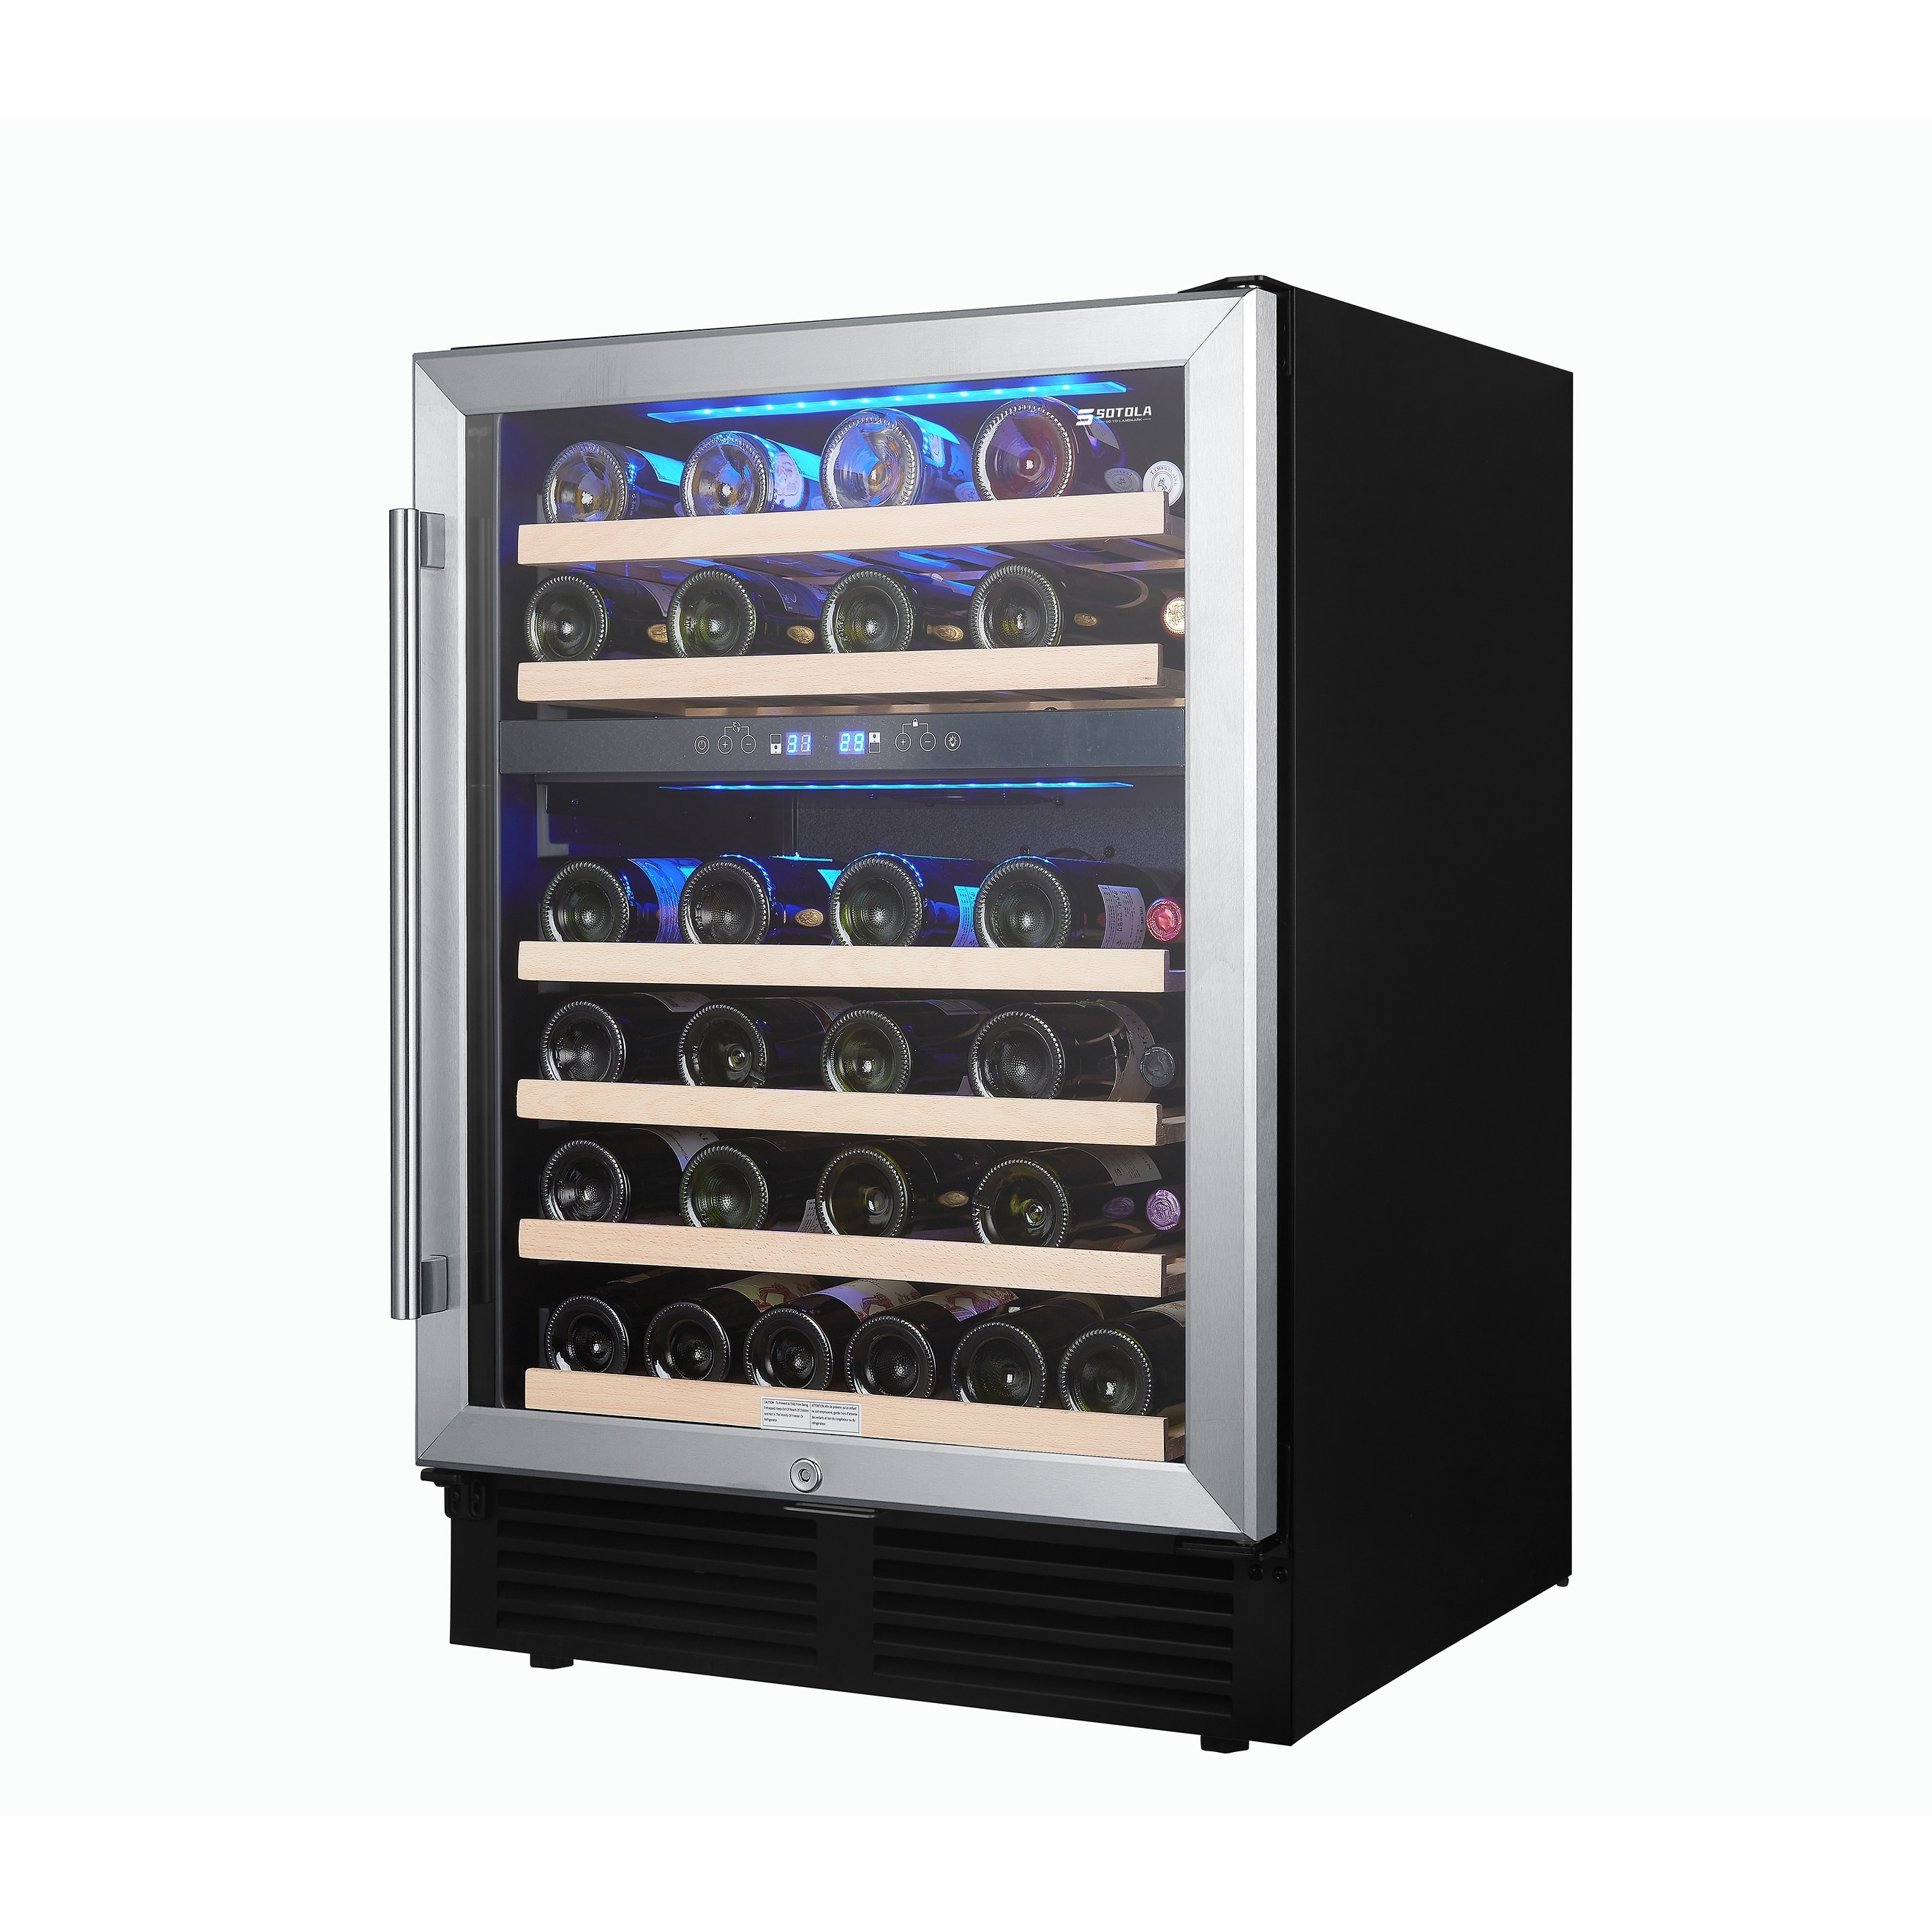 https://ak1.ostkcdn.com/images/products/is/images/direct/c51eb9531033e99dccd6b00cb6d49068766e1278/Freestanding-Wine-Cooler-Cabinet-Beverage-Fridge-Small-Wine-Cellar.jpg